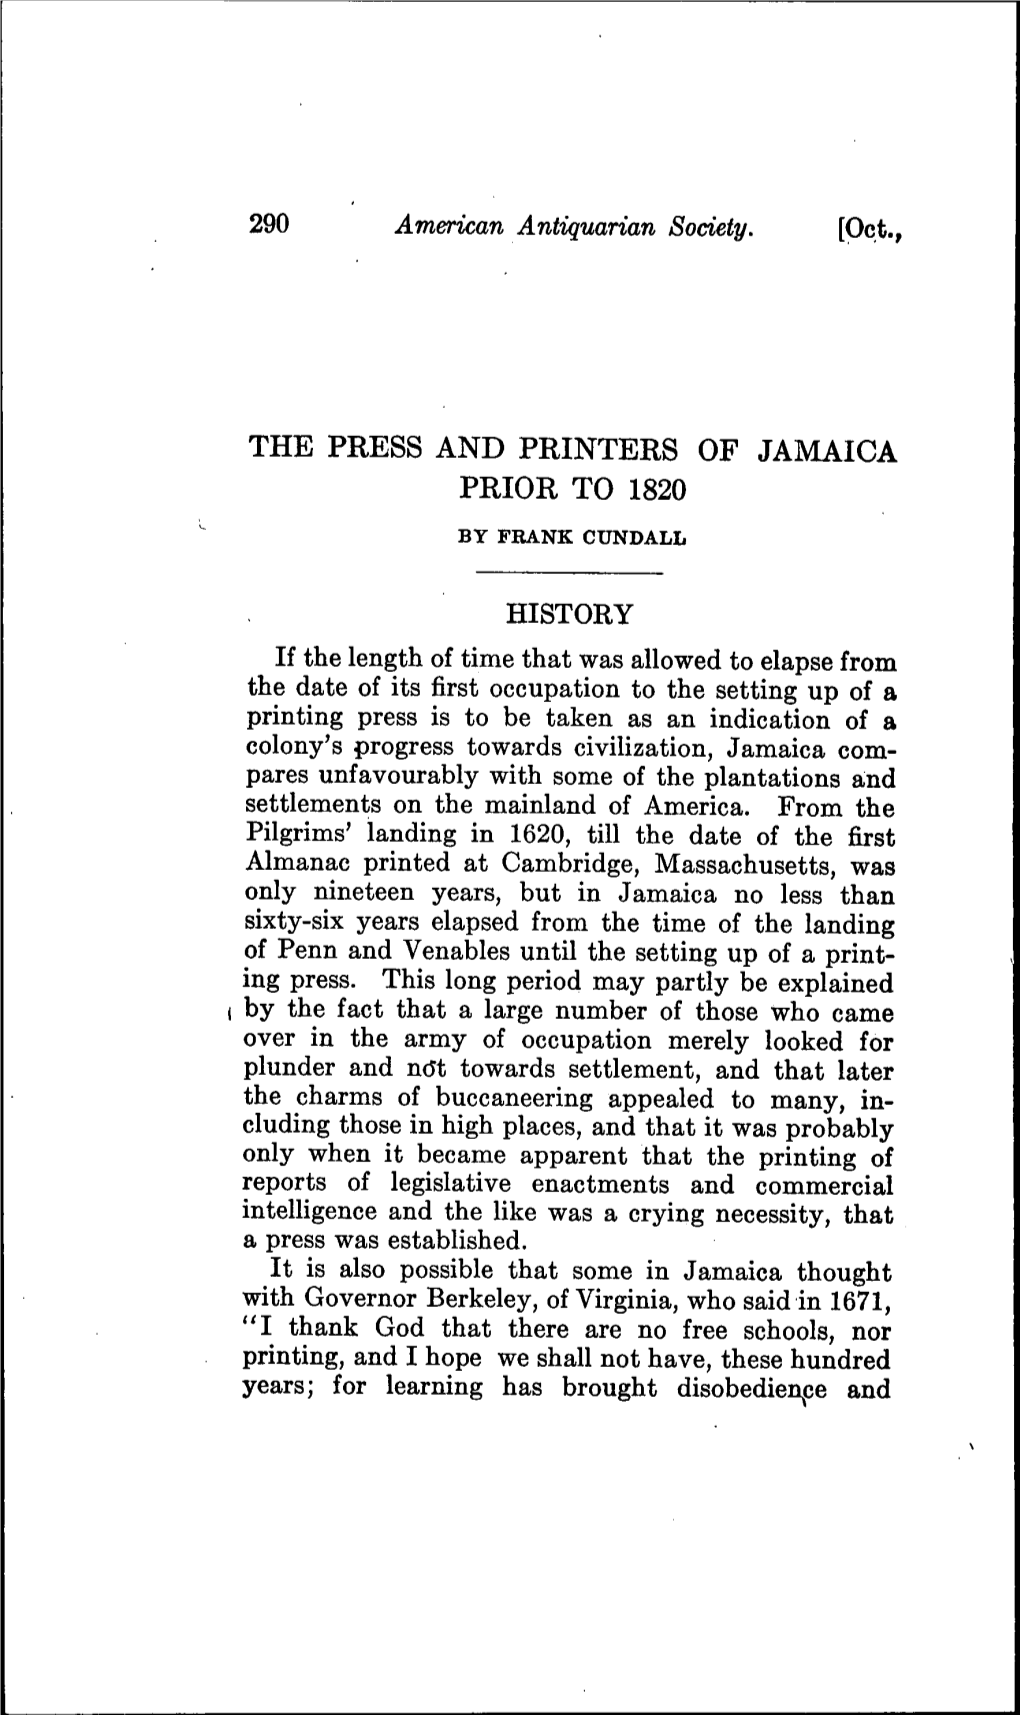 The Press and Printers of Jamaica Prior to 1820 by Fbank Cundall